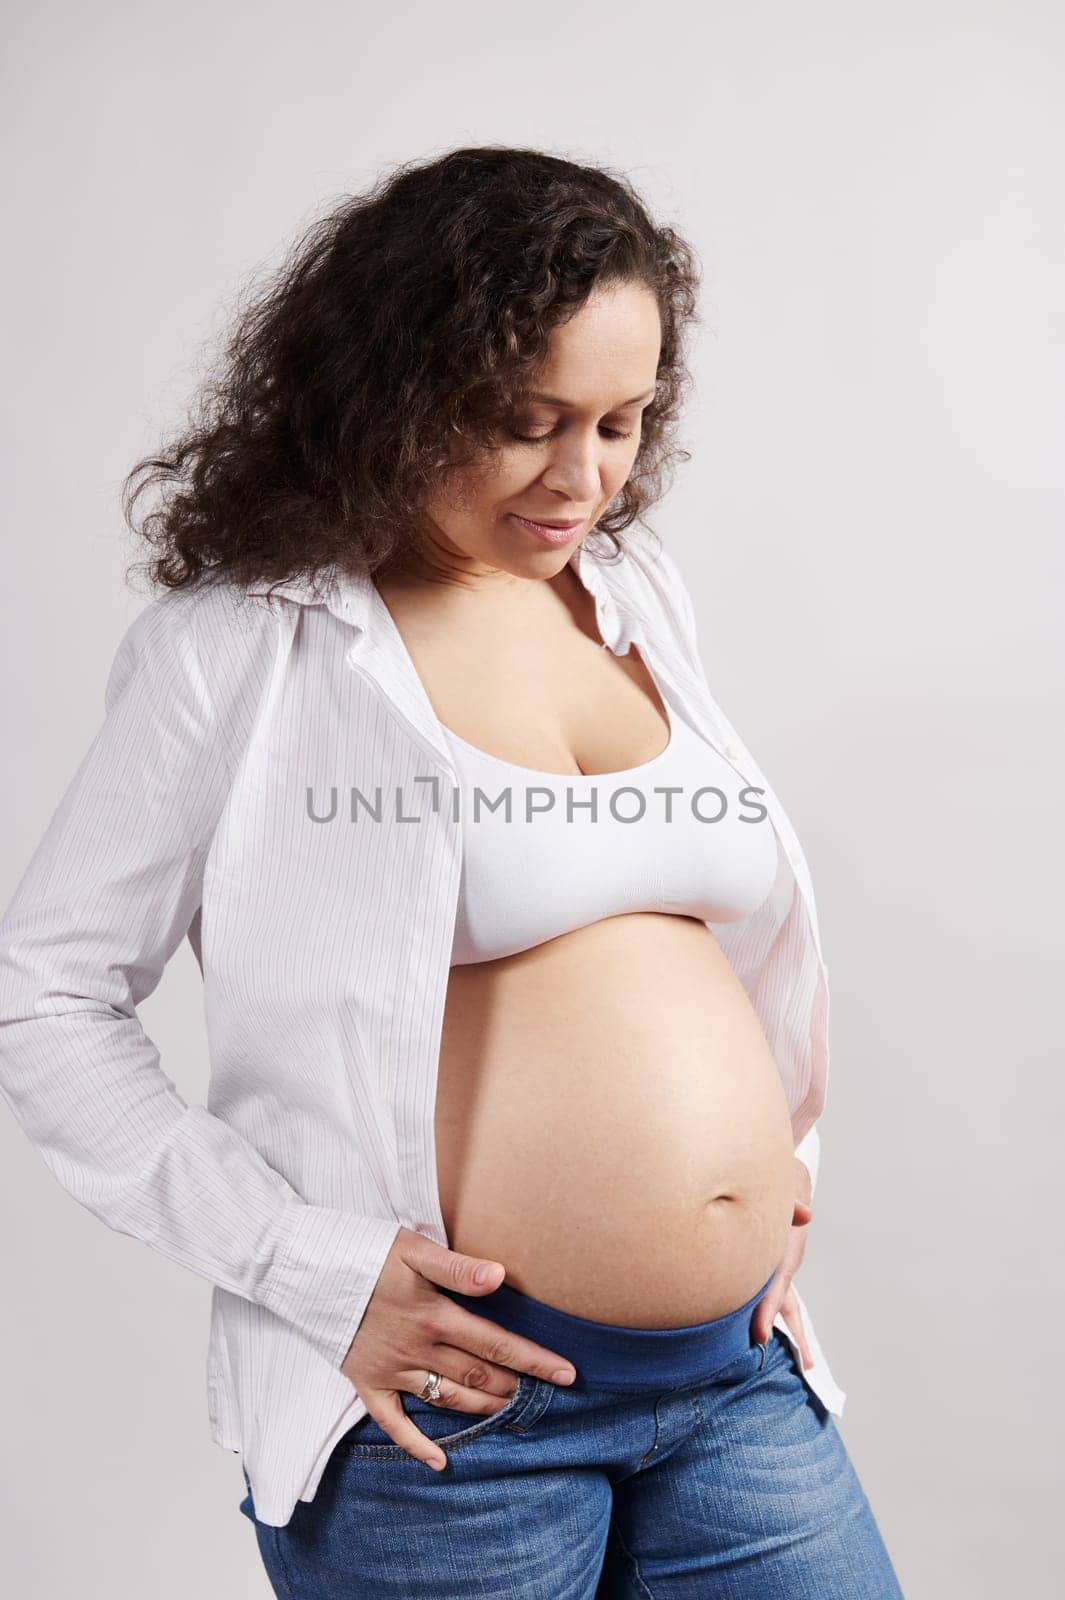 Beautiful curly haired multi ethnic pregnant woman with naked belly, isolated on background. Pregnancy 6 month. 24 weeks by artgf